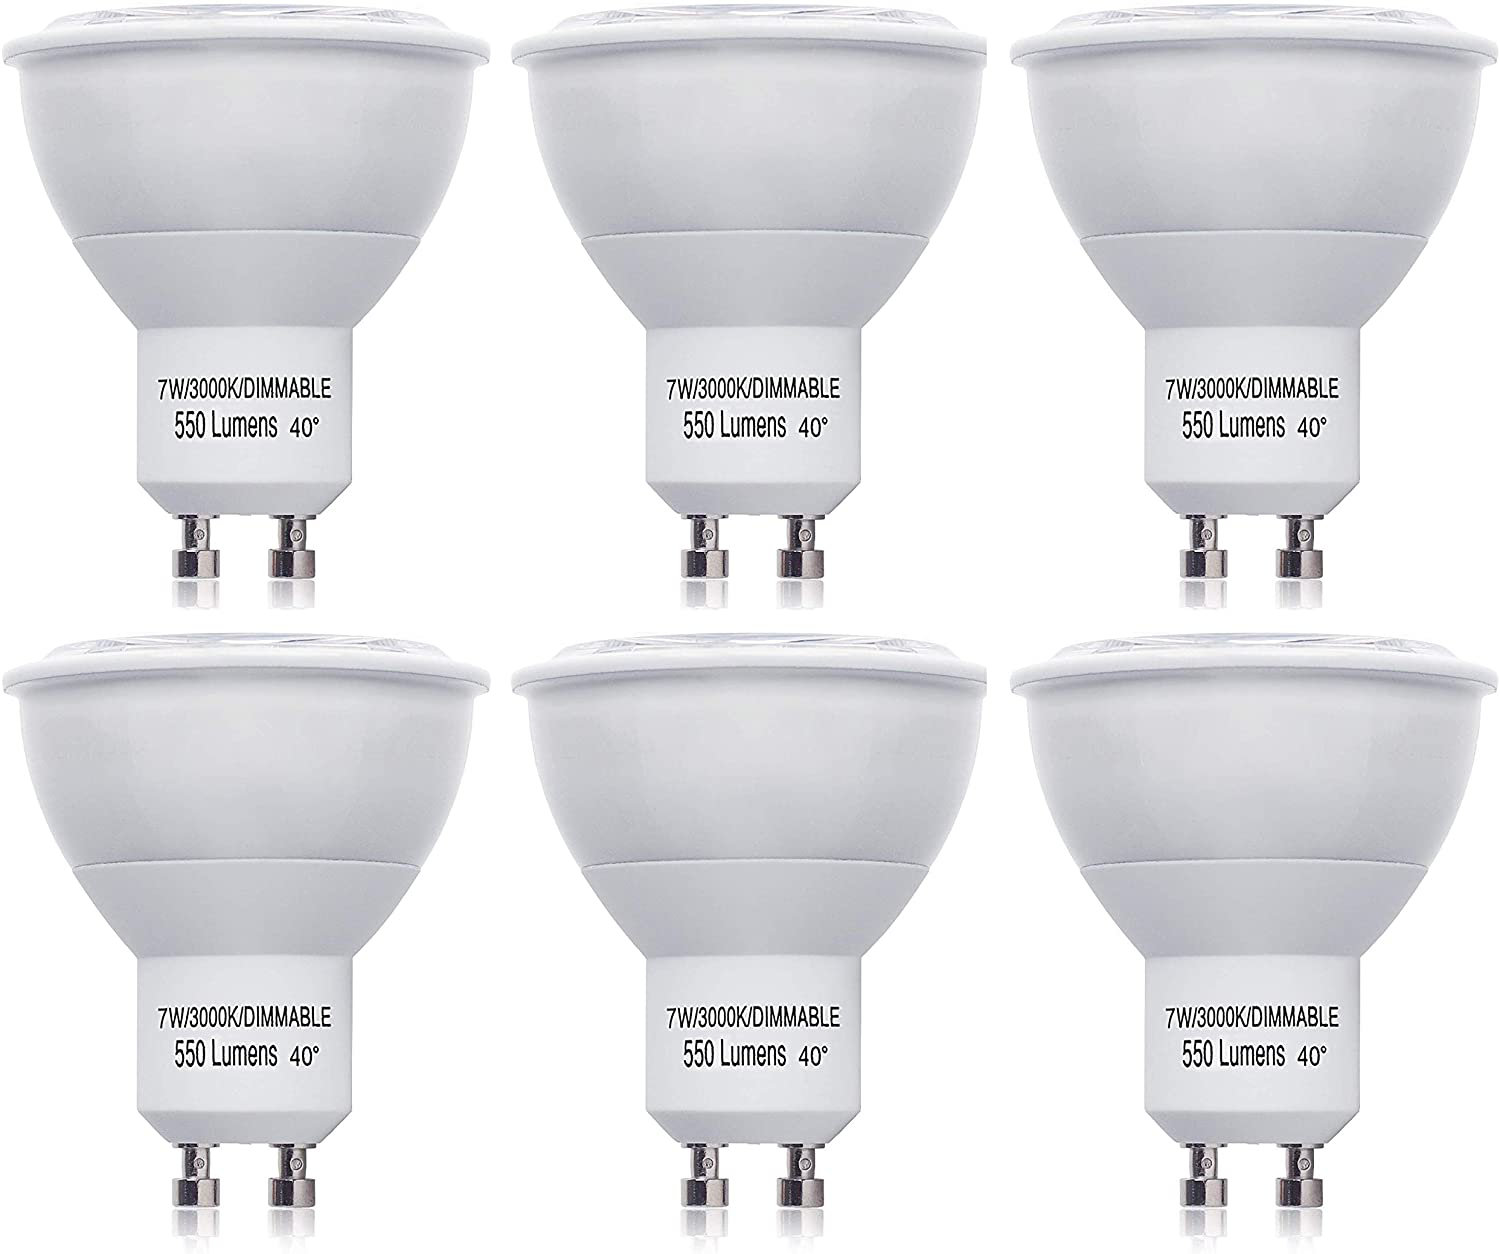 7W Single Source LED MR16 Bulb (50W Halogen Replacement)